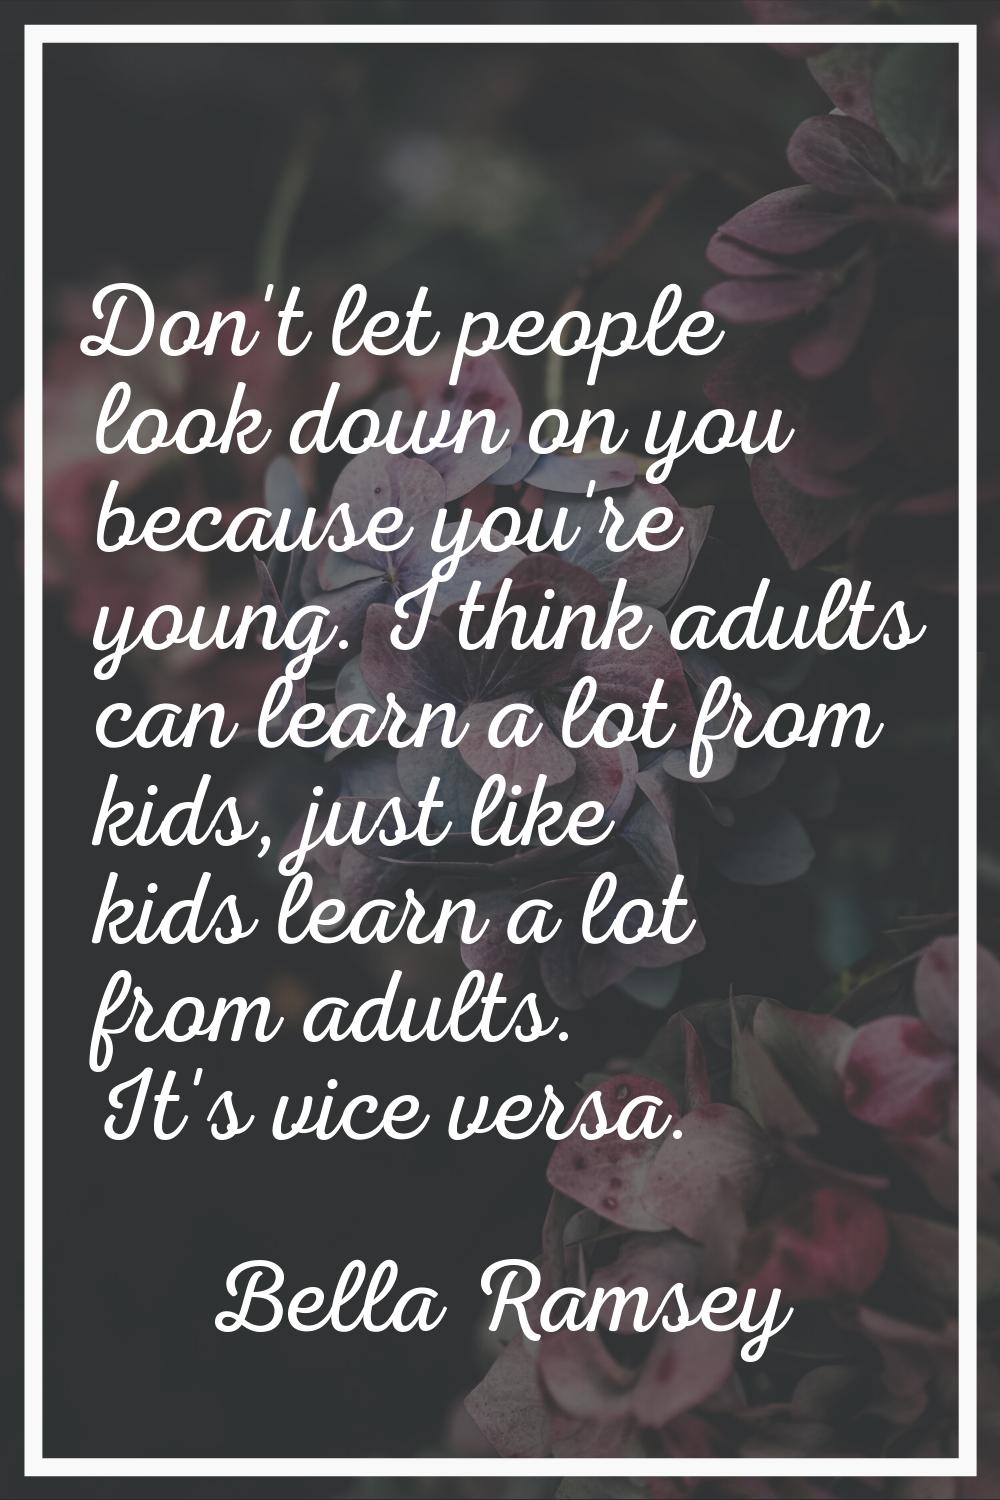 Don't let people look down on you because you're young. I think adults can learn a lot from kids, j